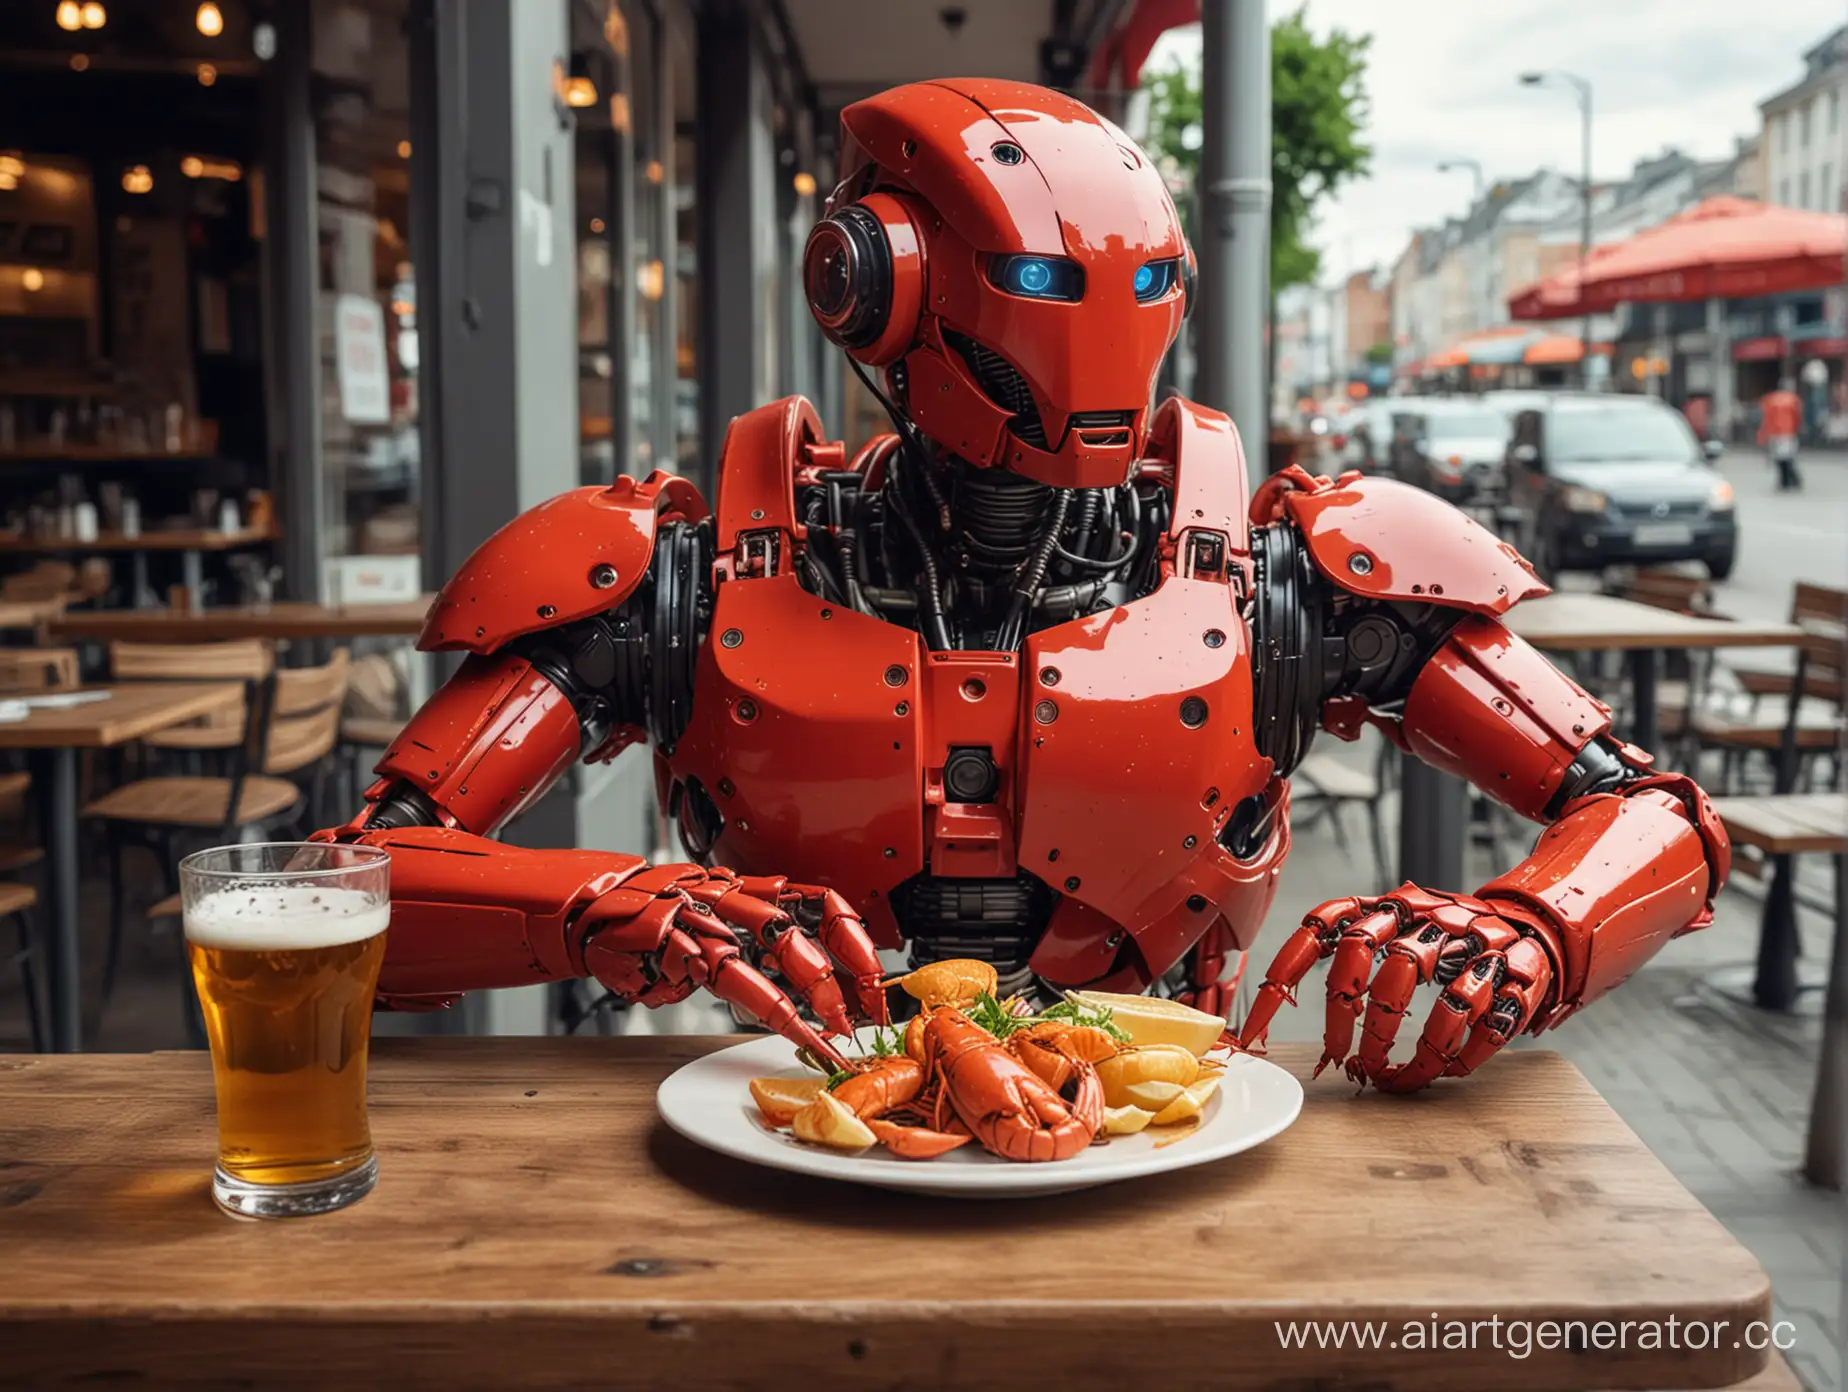 Red-Robot-Enjoying-Crayfish-and-Beer-at-a-Cozy-Cafe